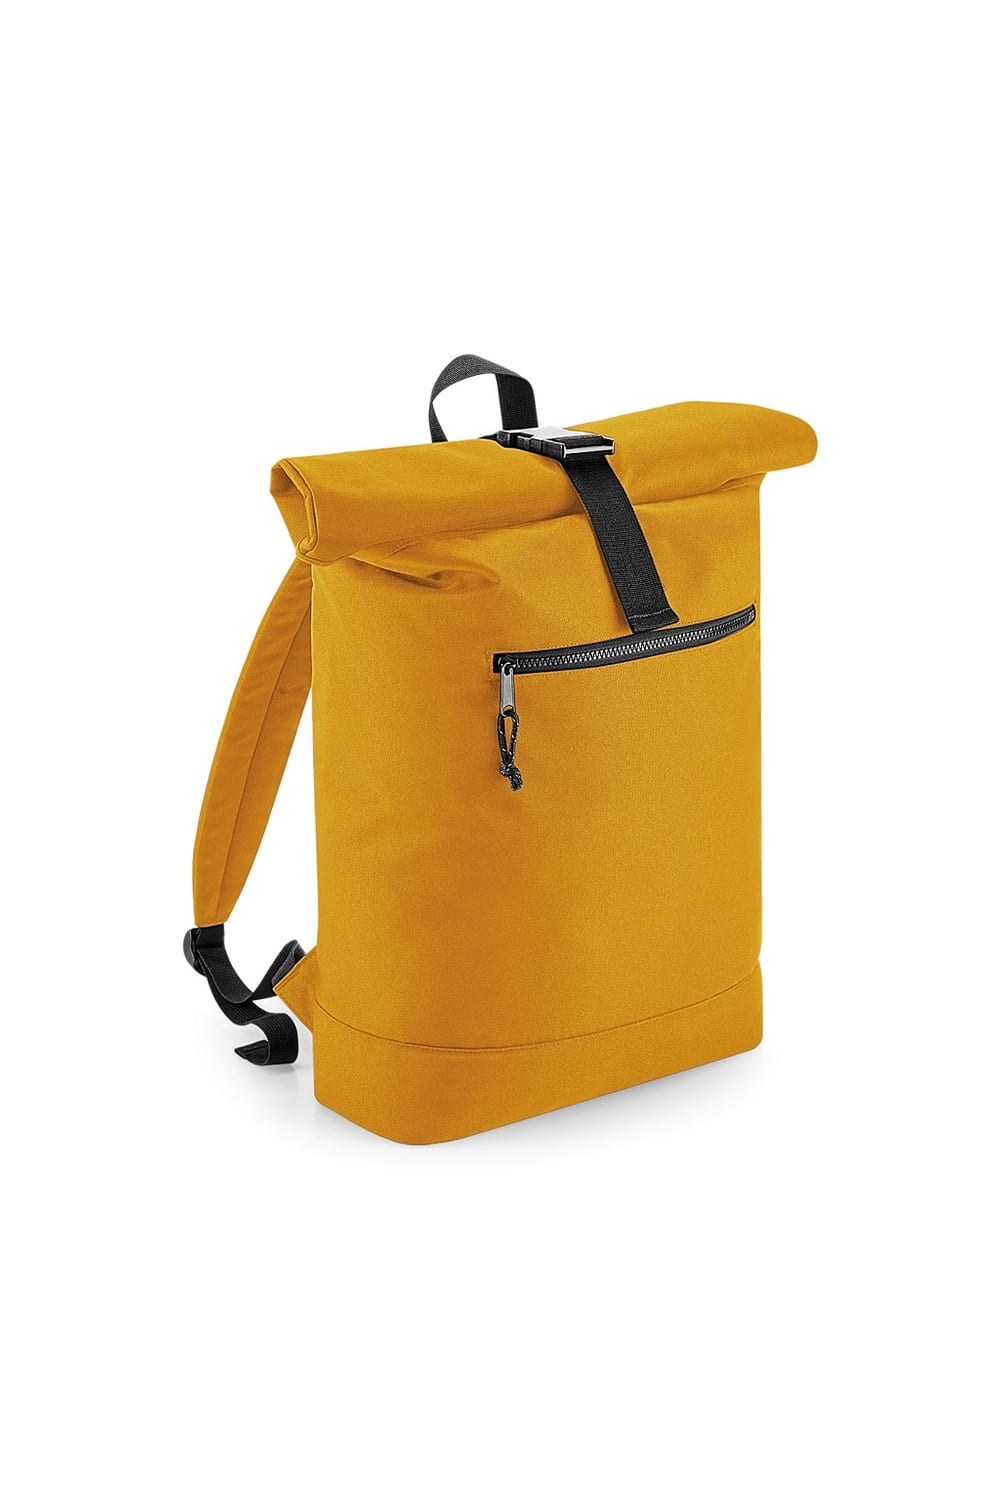 BagBase Unisex Recycled Roll-Top Backpack (Mustard) (One Size)